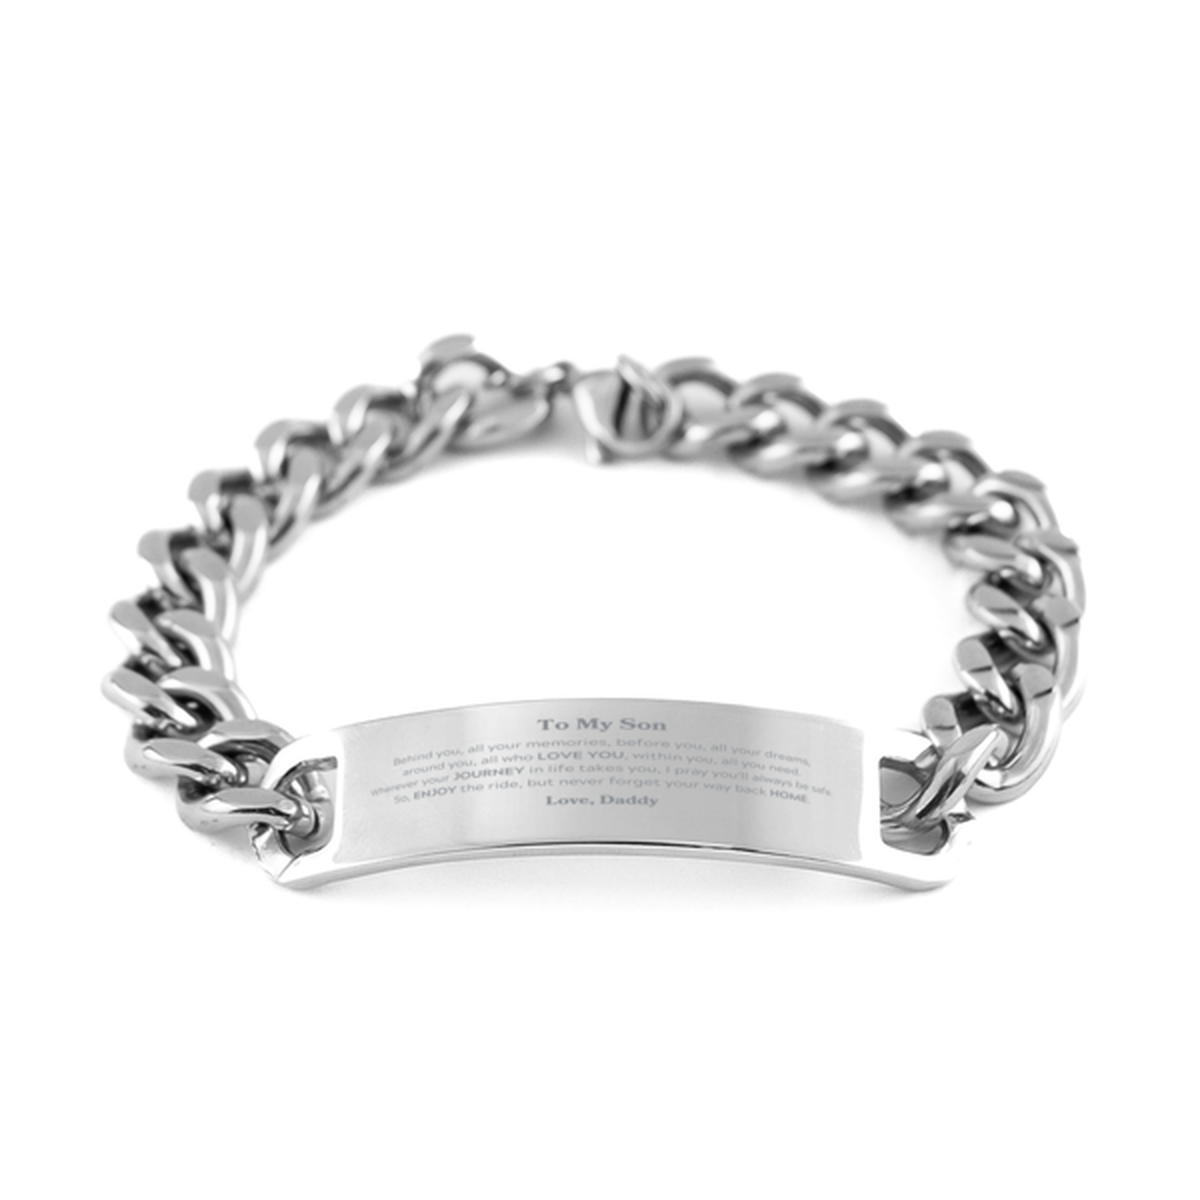 To My Son Graduation Gifts from Daddy, Son Cuban Chain Stainless Steel Bracelet Christmas Birthday Gifts for Son Behind you, all your memories, before you, all your dreams. Love, Daddy